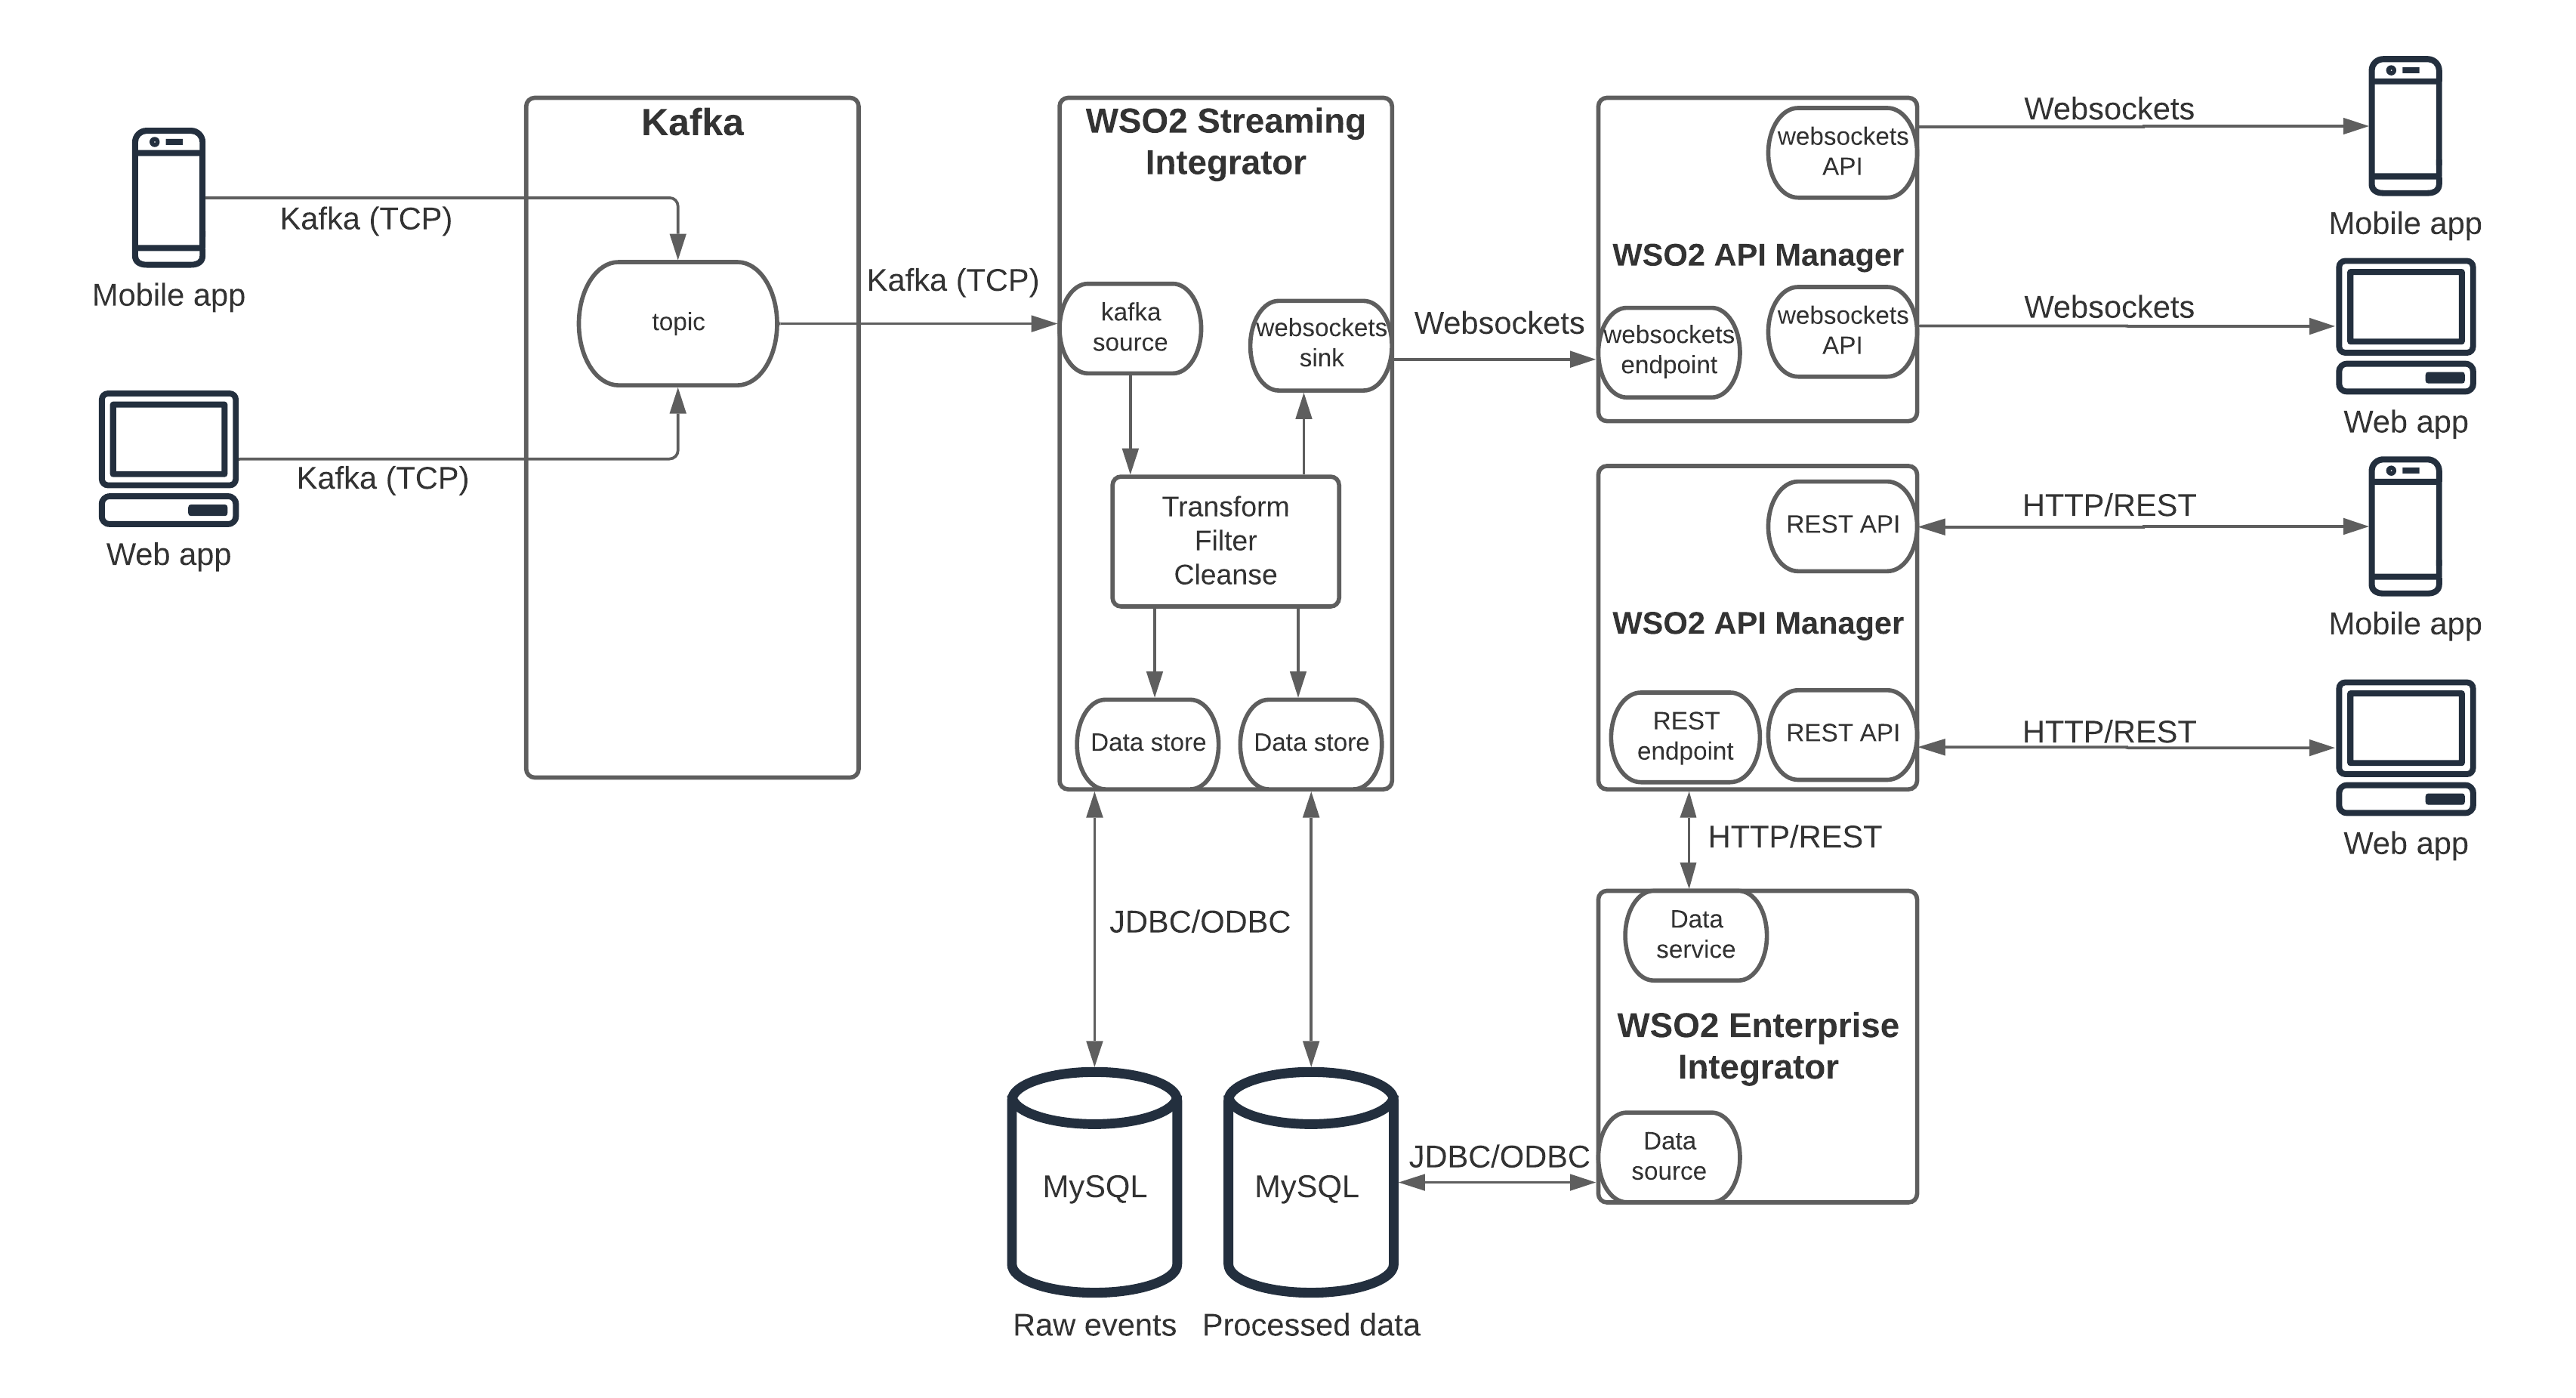 Real-time, event-driven information system with Kafka and WSO2 platform details